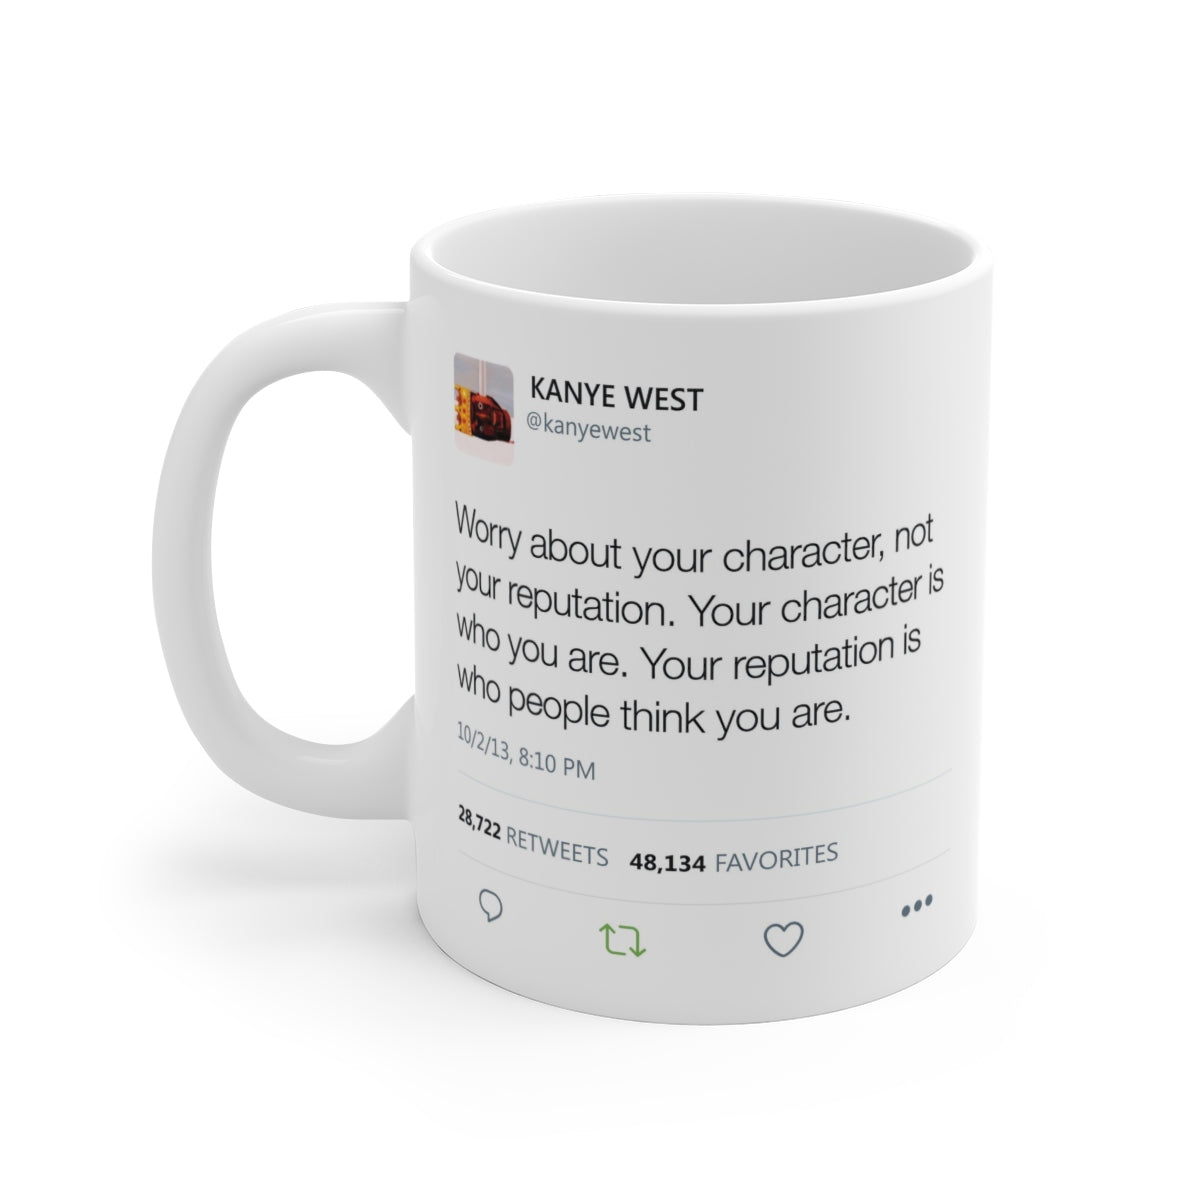 Worry about your character, not your reputation - Kanye West Tweet Mug-11oz-Archethype